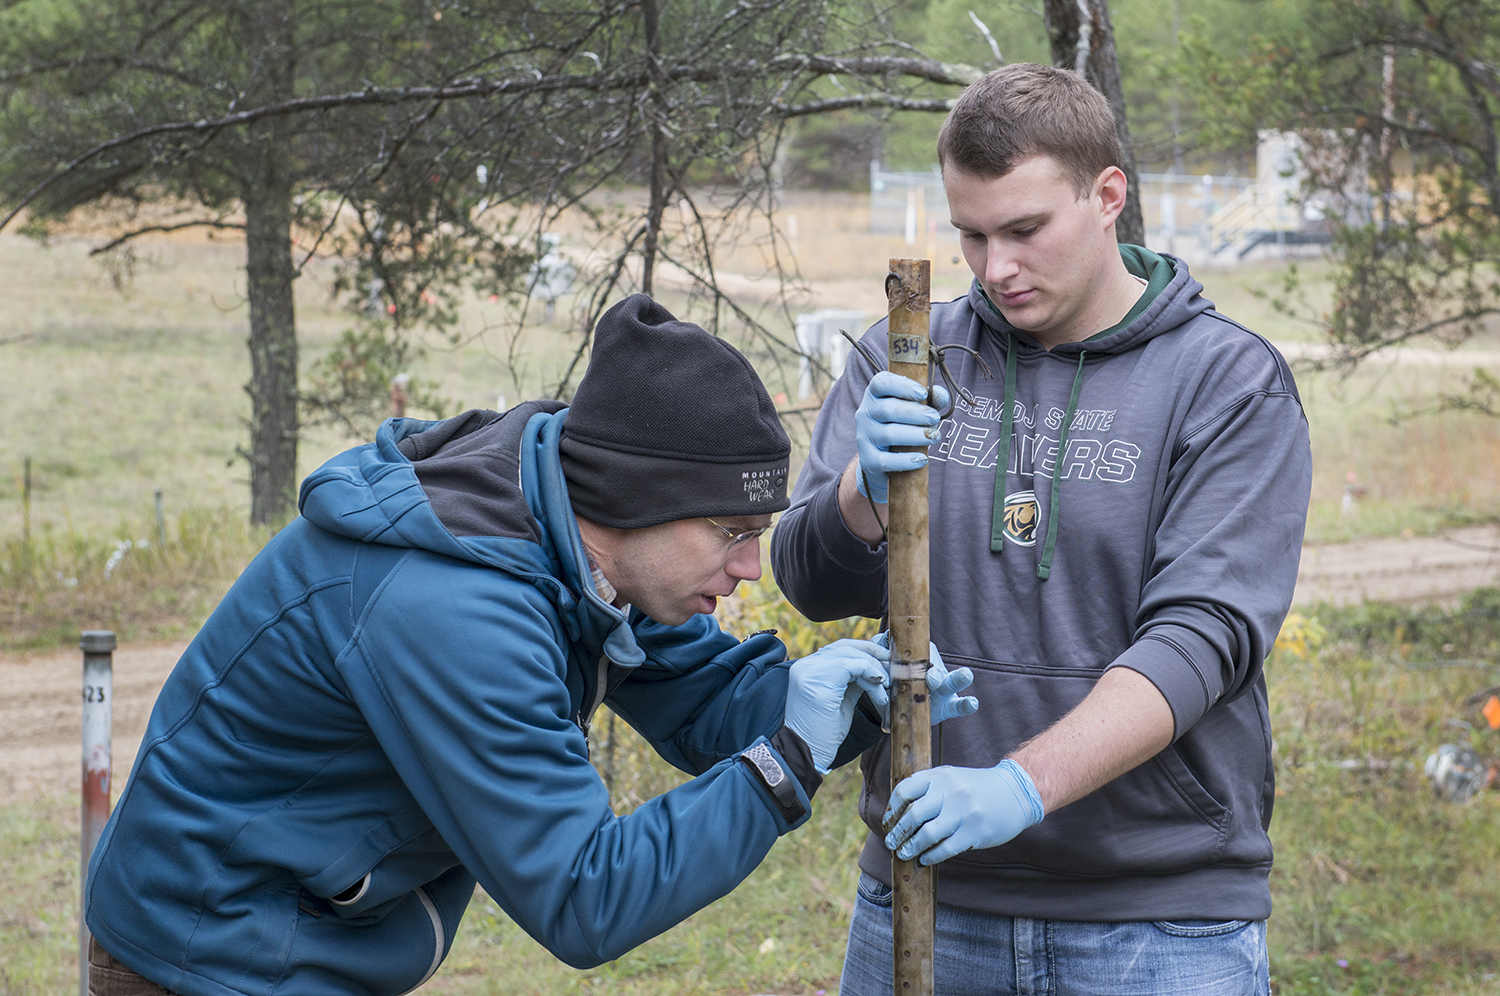 Dr. Carl Isaacson, associate professor of environmental studies, and BSU students conducting research on microorganisms at an oil spill site in Pinewood, Minn.